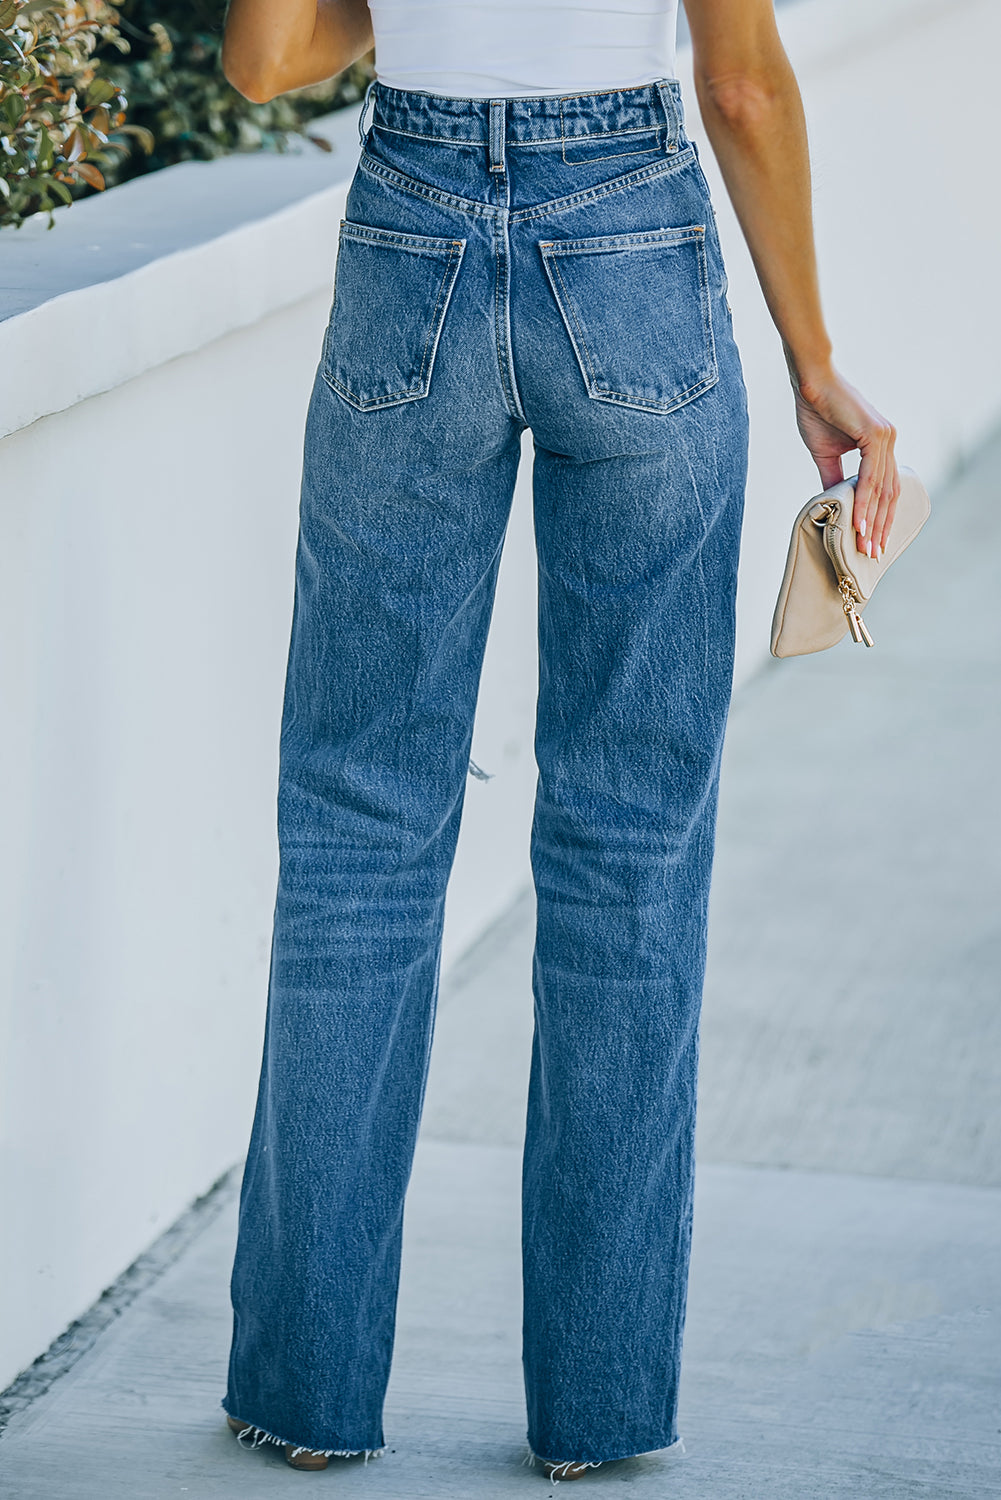 Azure Sky High-Rise Cotton Jeans | Hypoallergenic - Allergy Friendly - Naturally Free